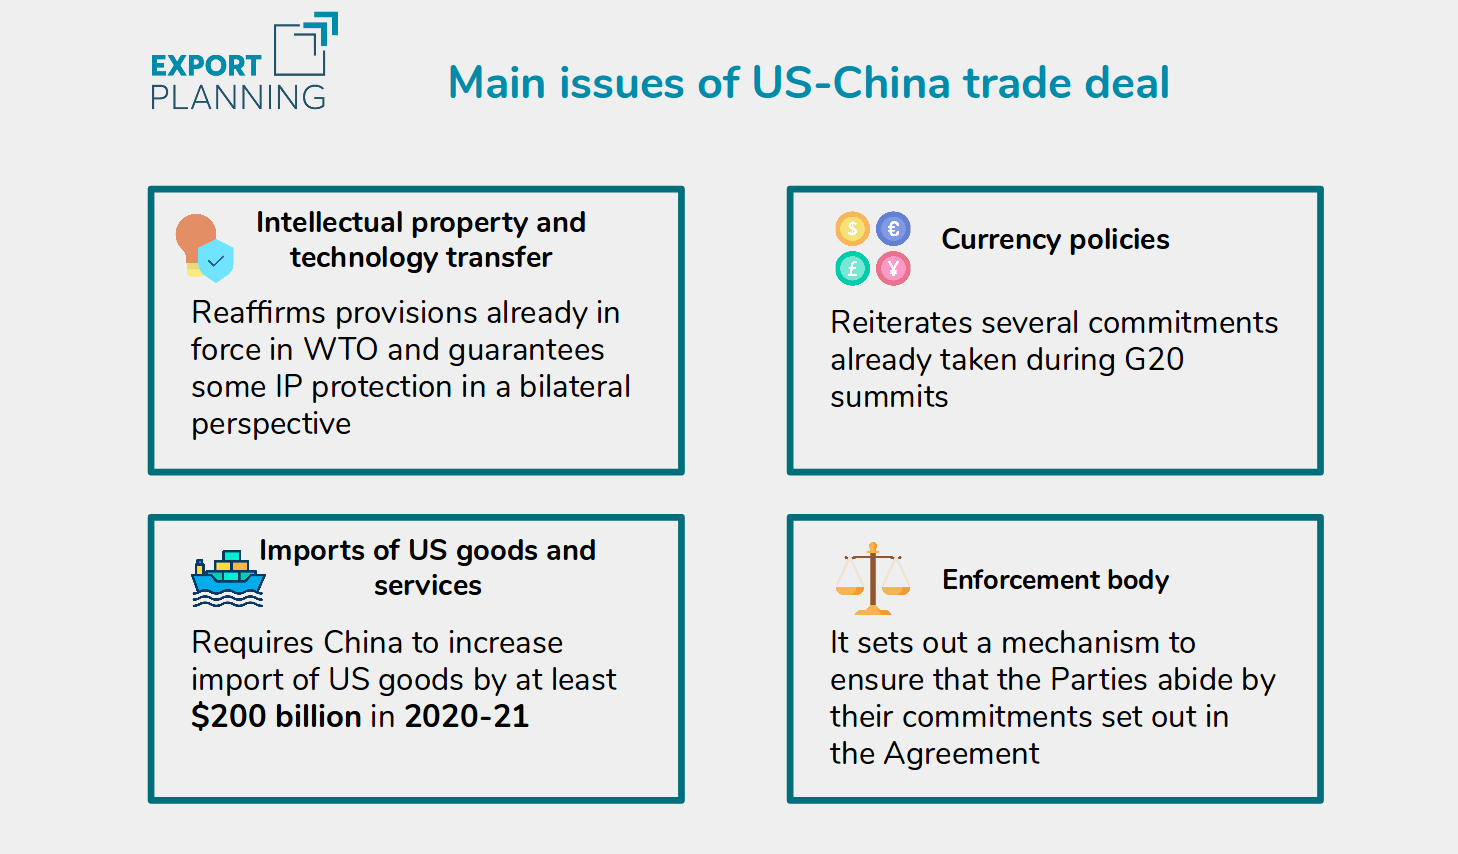 Main issues of trade deal